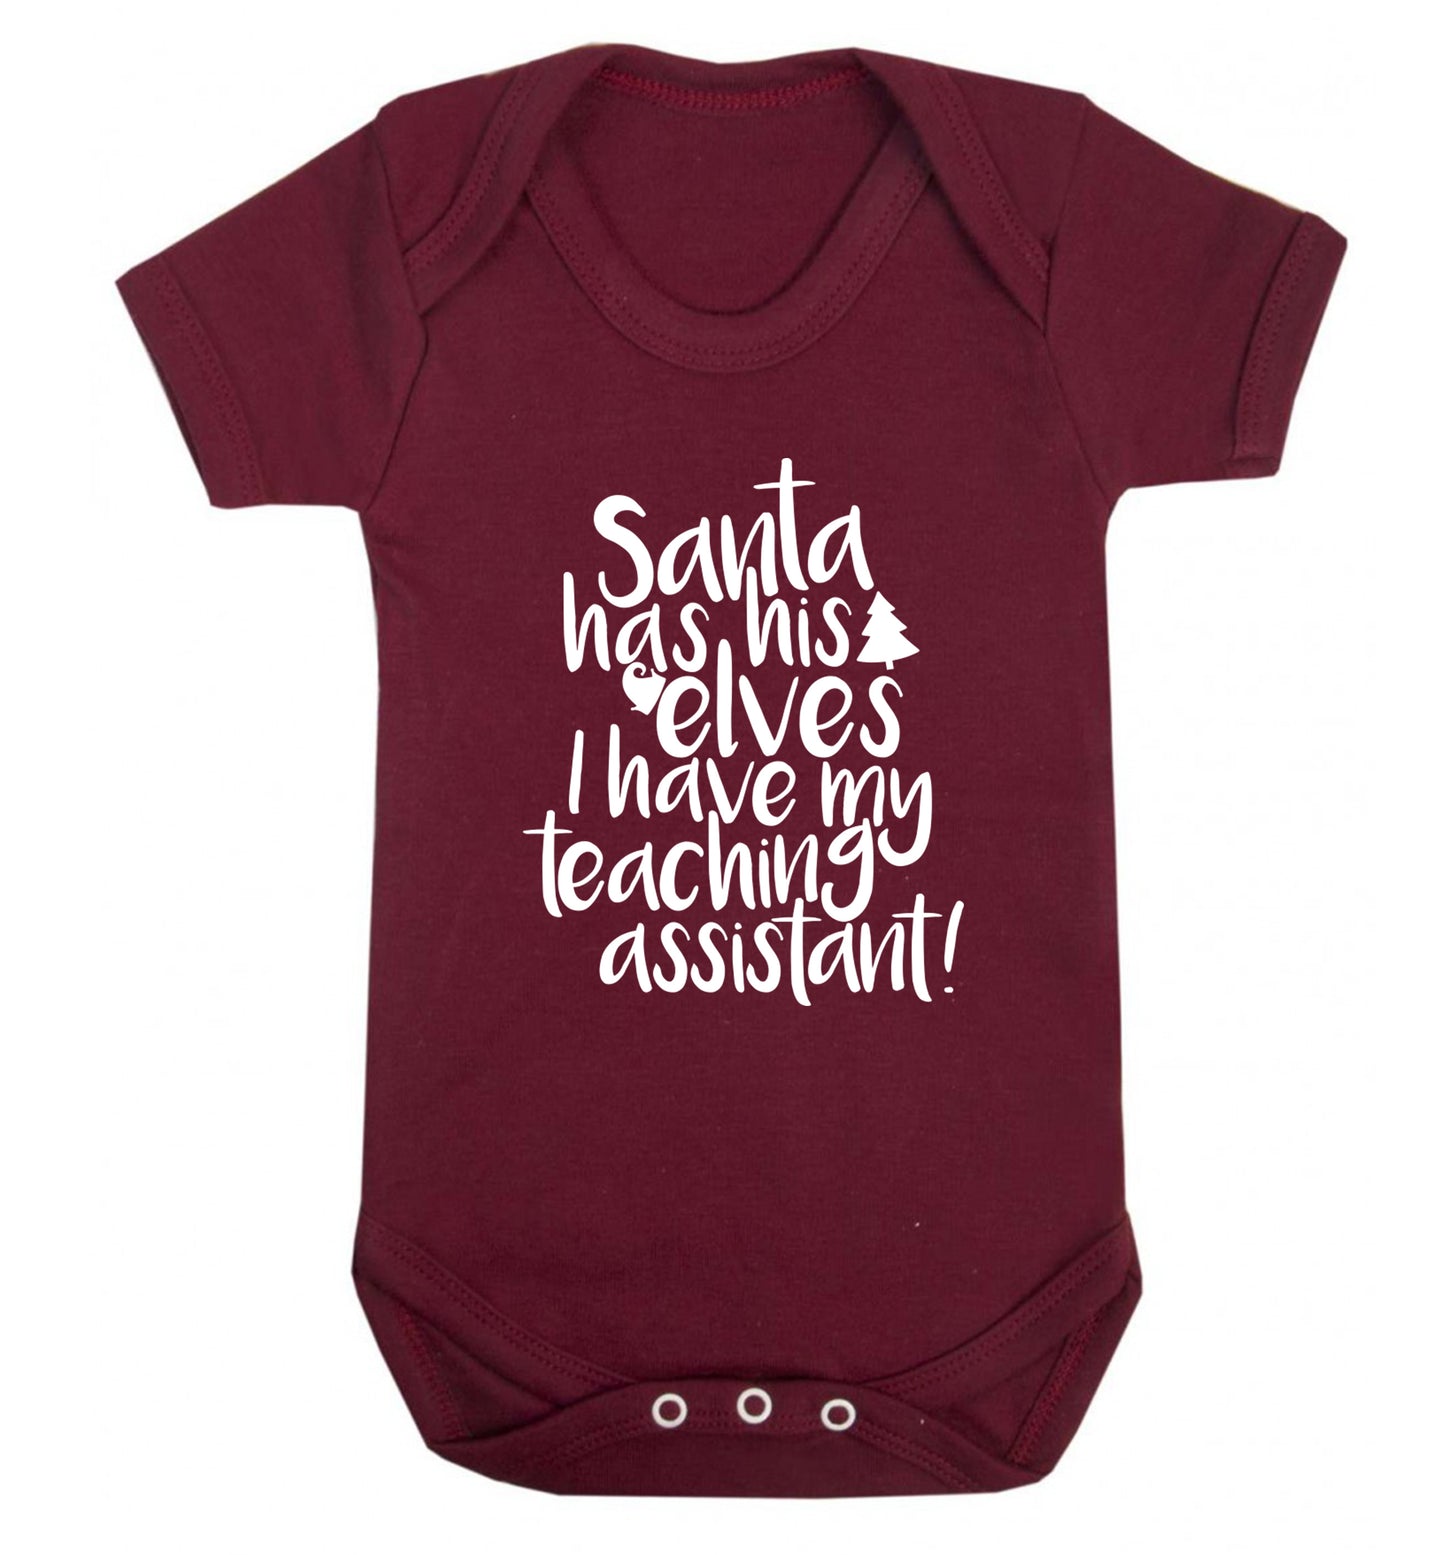 Santa has his elves I have my teaching assistant Baby Vest maroon 18-24 months